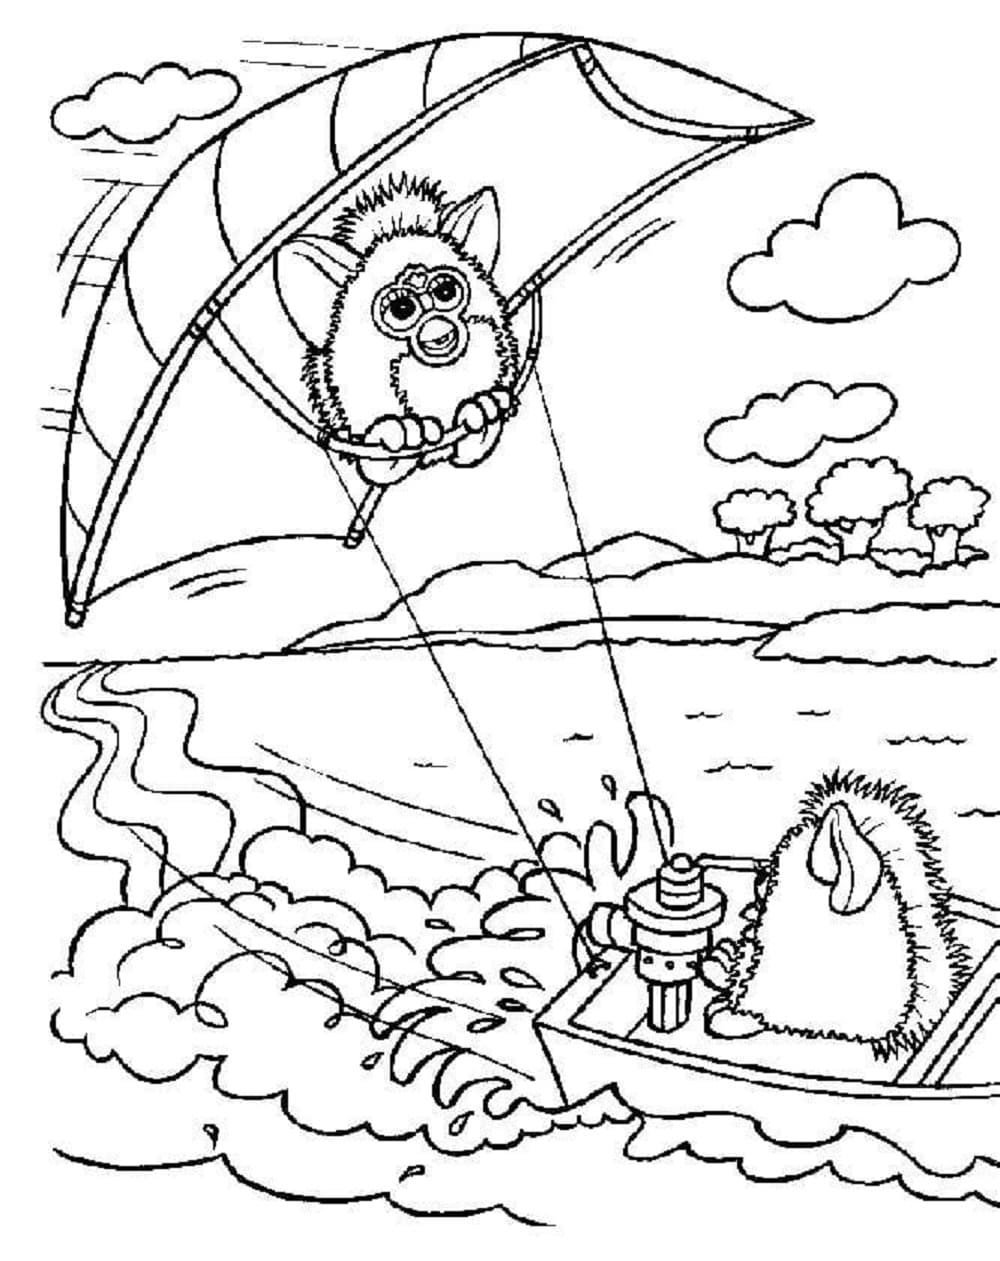 Printable Furby on Summer Vacation Coloring Page